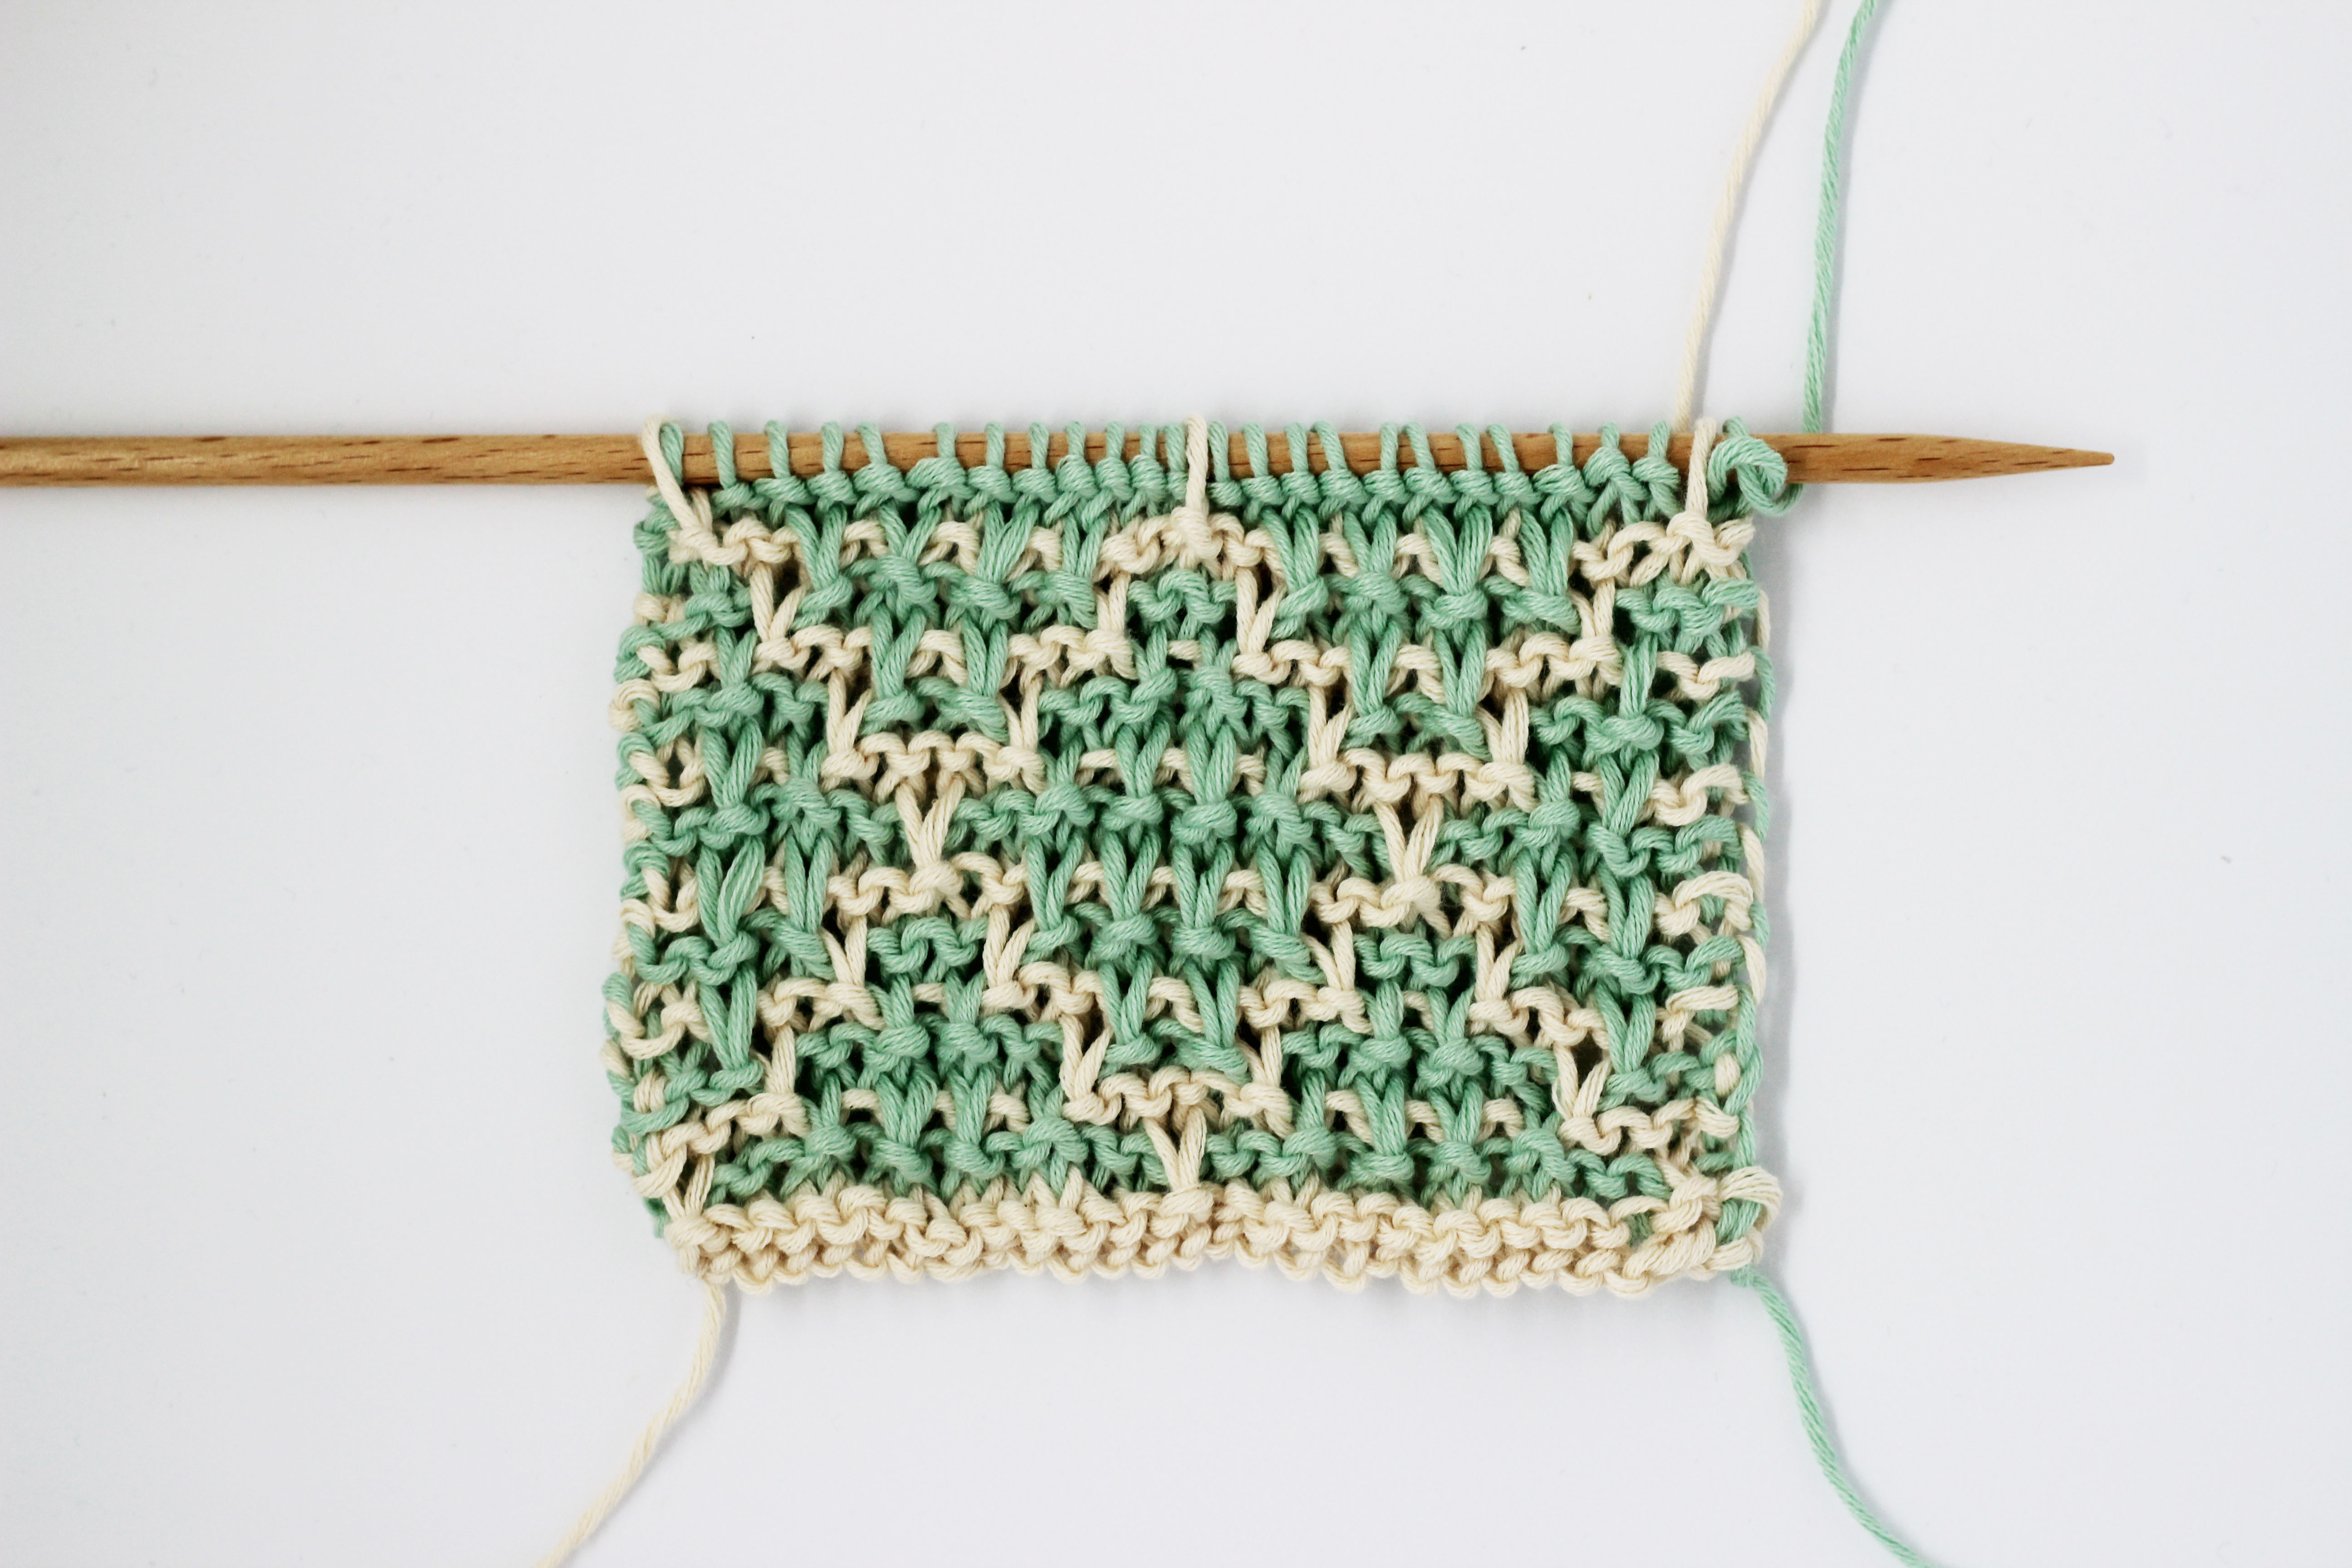 Knitting Blogs With Patterns How To Knit Color Mosaics In Garter Stitch The Blog Usuk